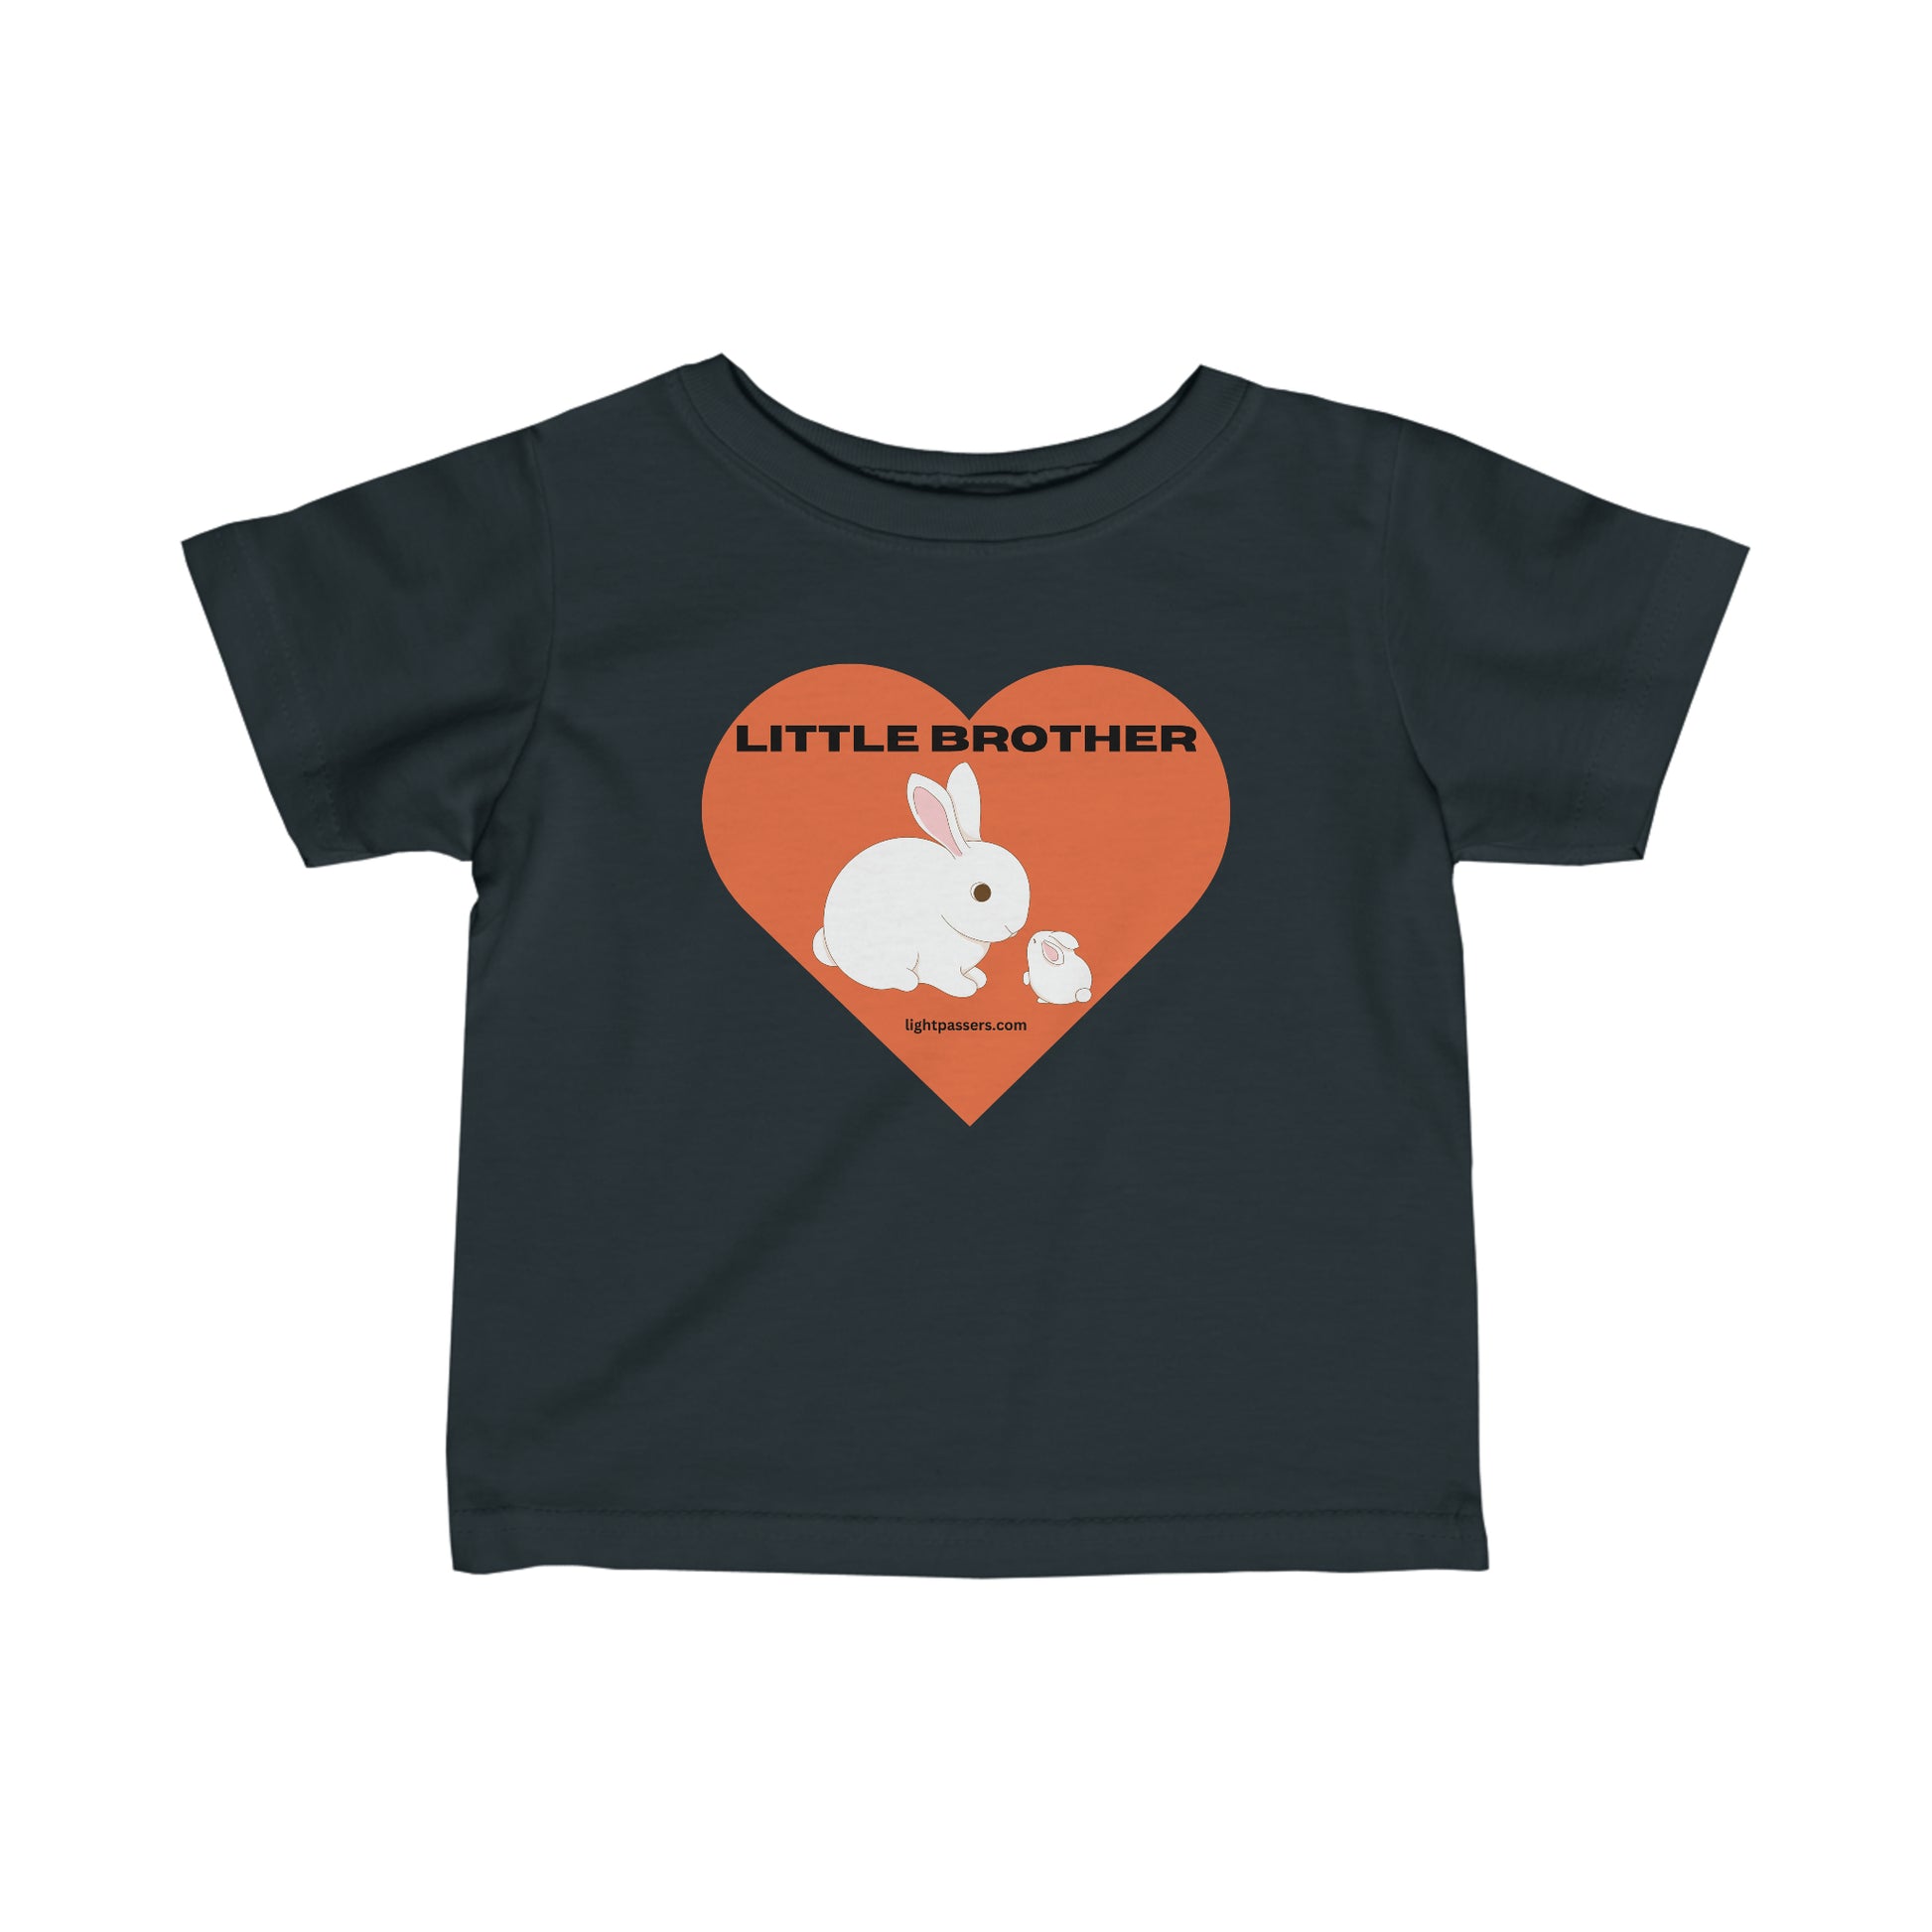 A black baby T-shirt featuring a white rabbit design. Infant fine jersey tee with side seams, ribbed knitting, and taped shoulders for durability and comfort.